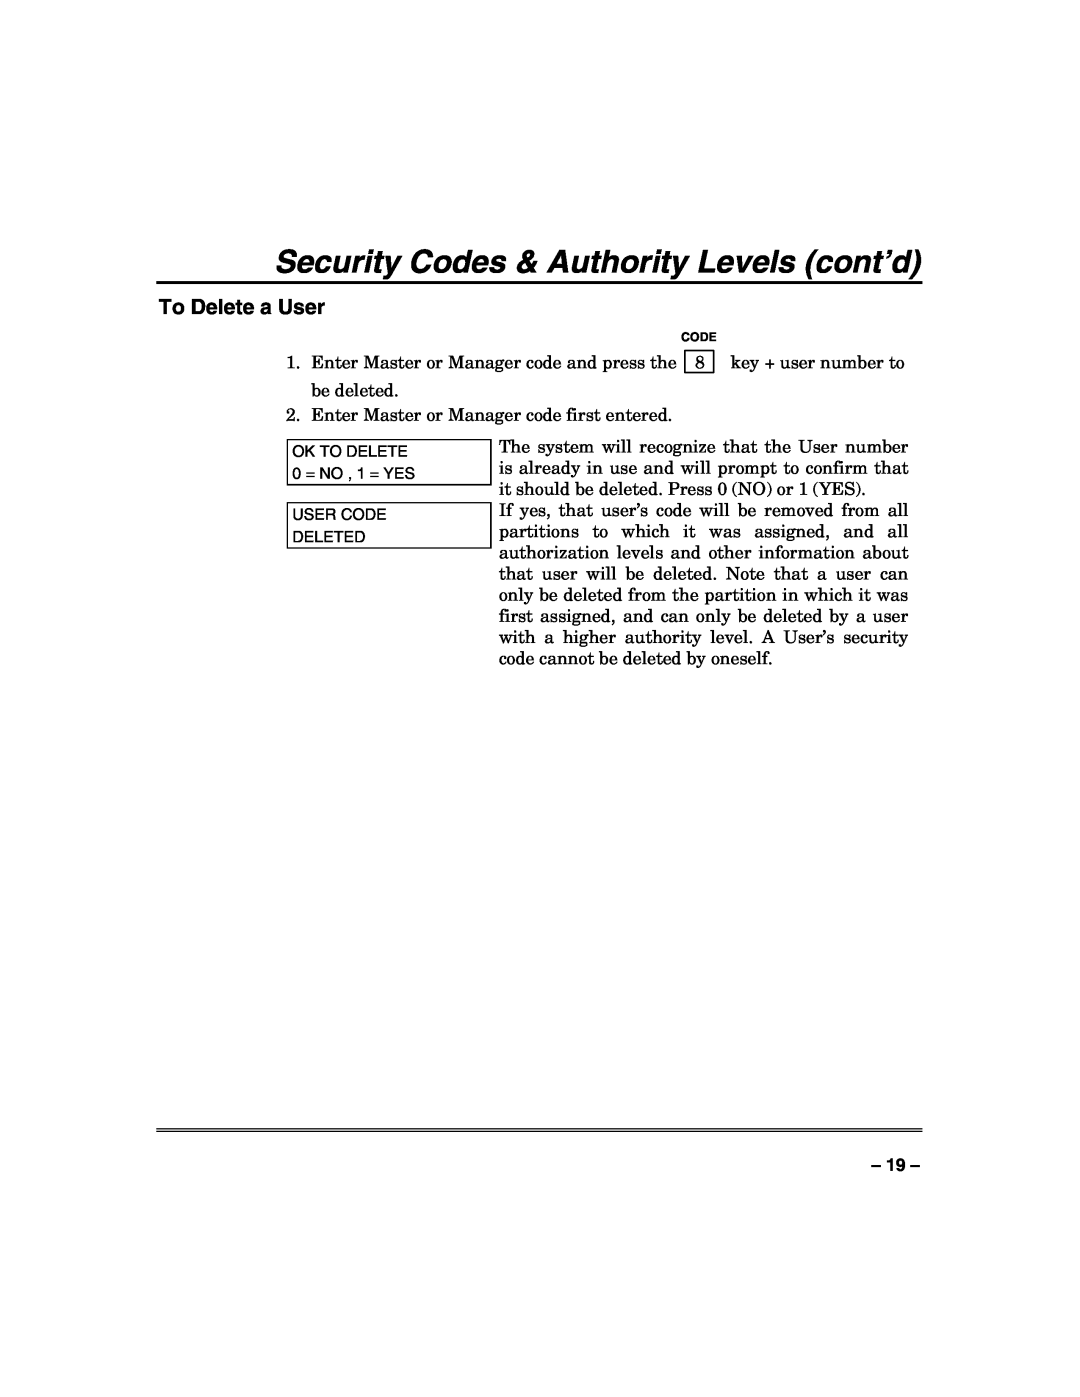 Honeywell N7003V3 manual To Delete a User, Security Codes & Authority Levels cont’d 